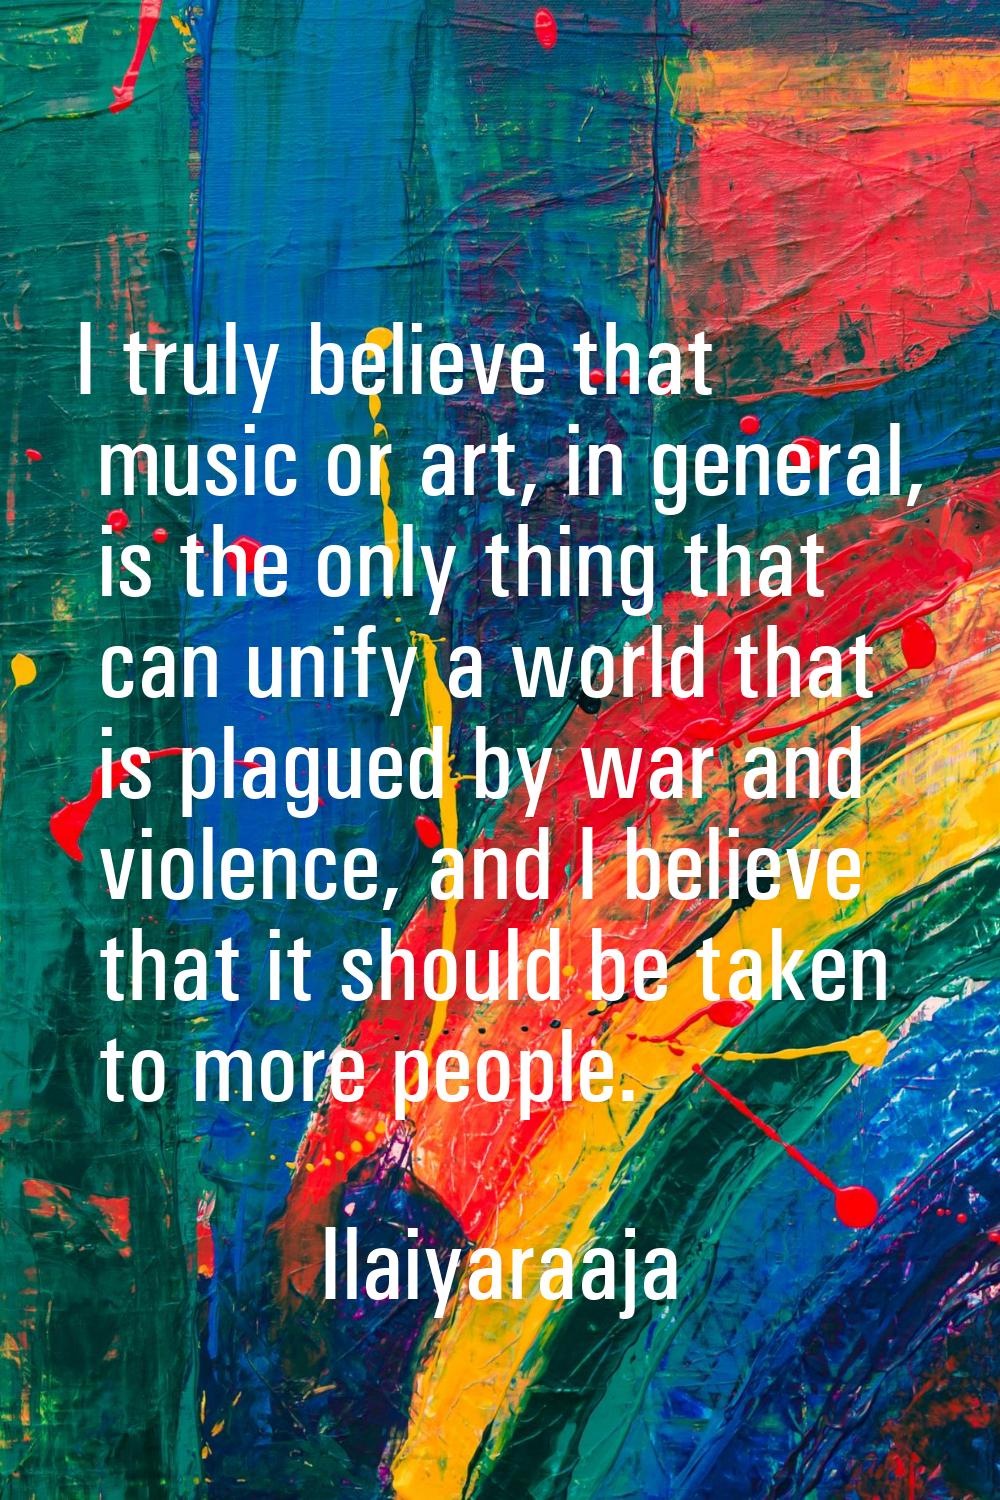 I truly believe that music or art, in general, is the only thing that can unify a world that is pla